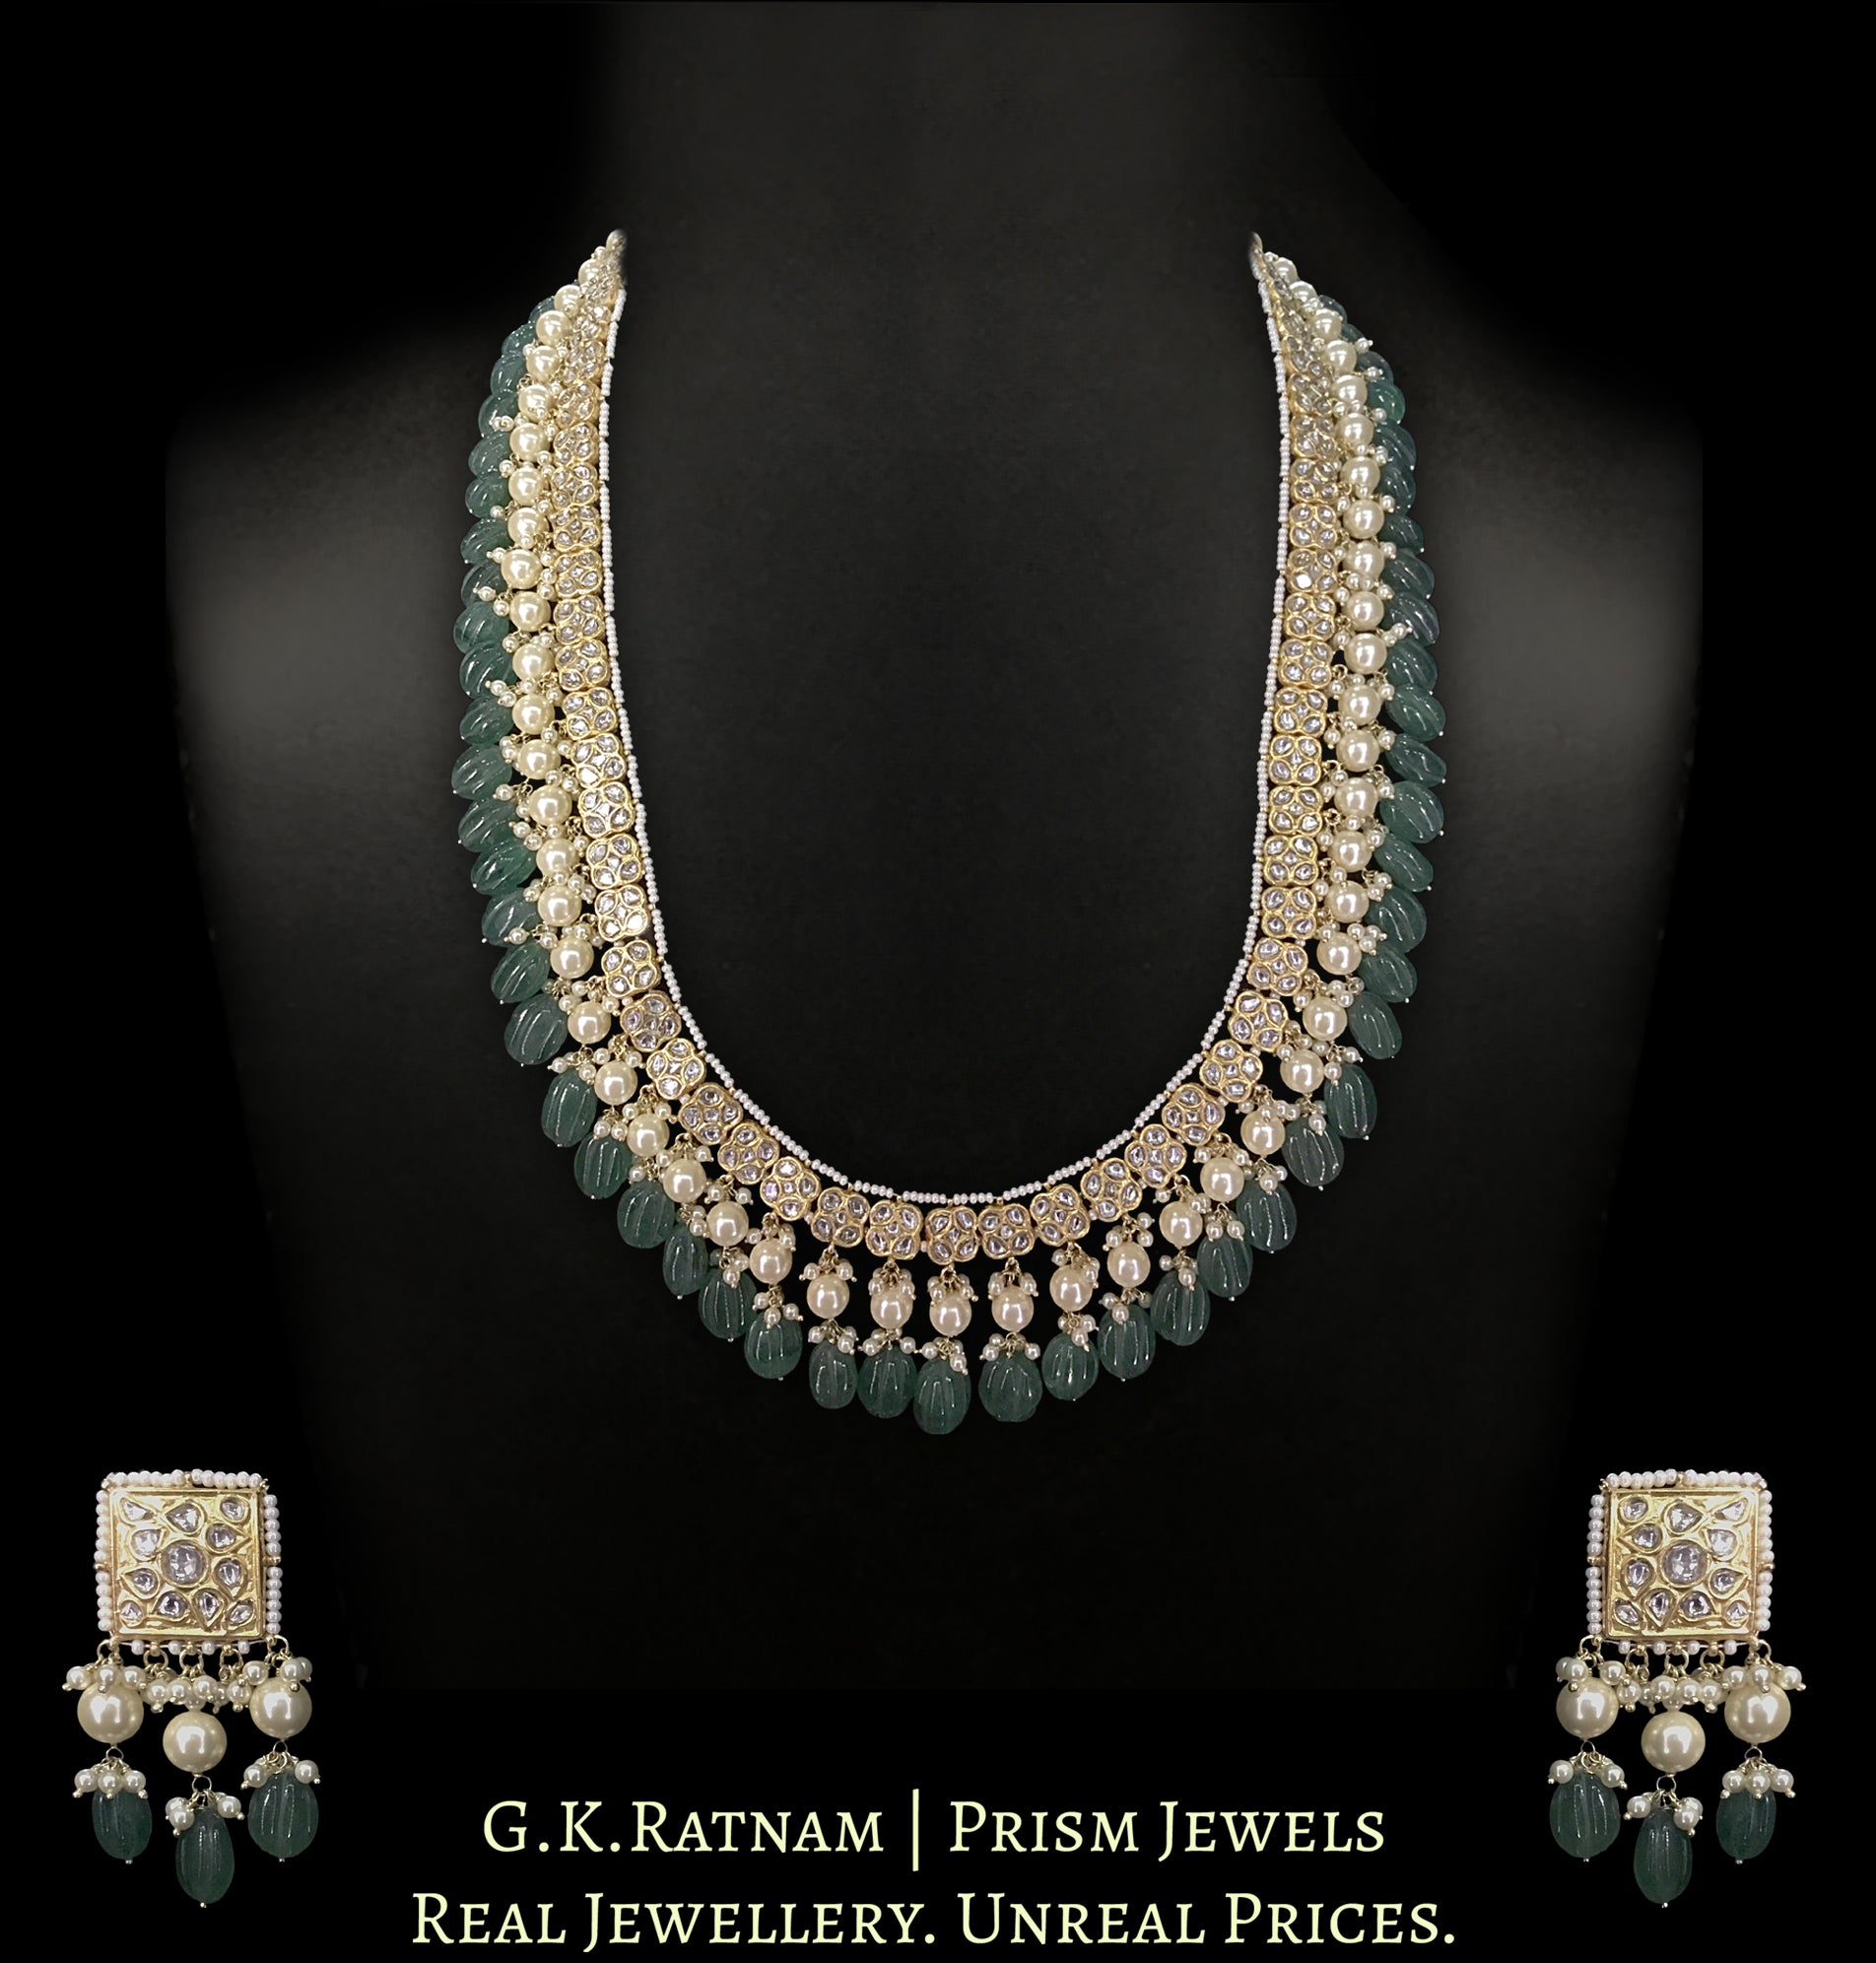 23k Gold and Diamond Polki Long Necklace Set with square motifs strung in Green Strawberry Quartz Melons